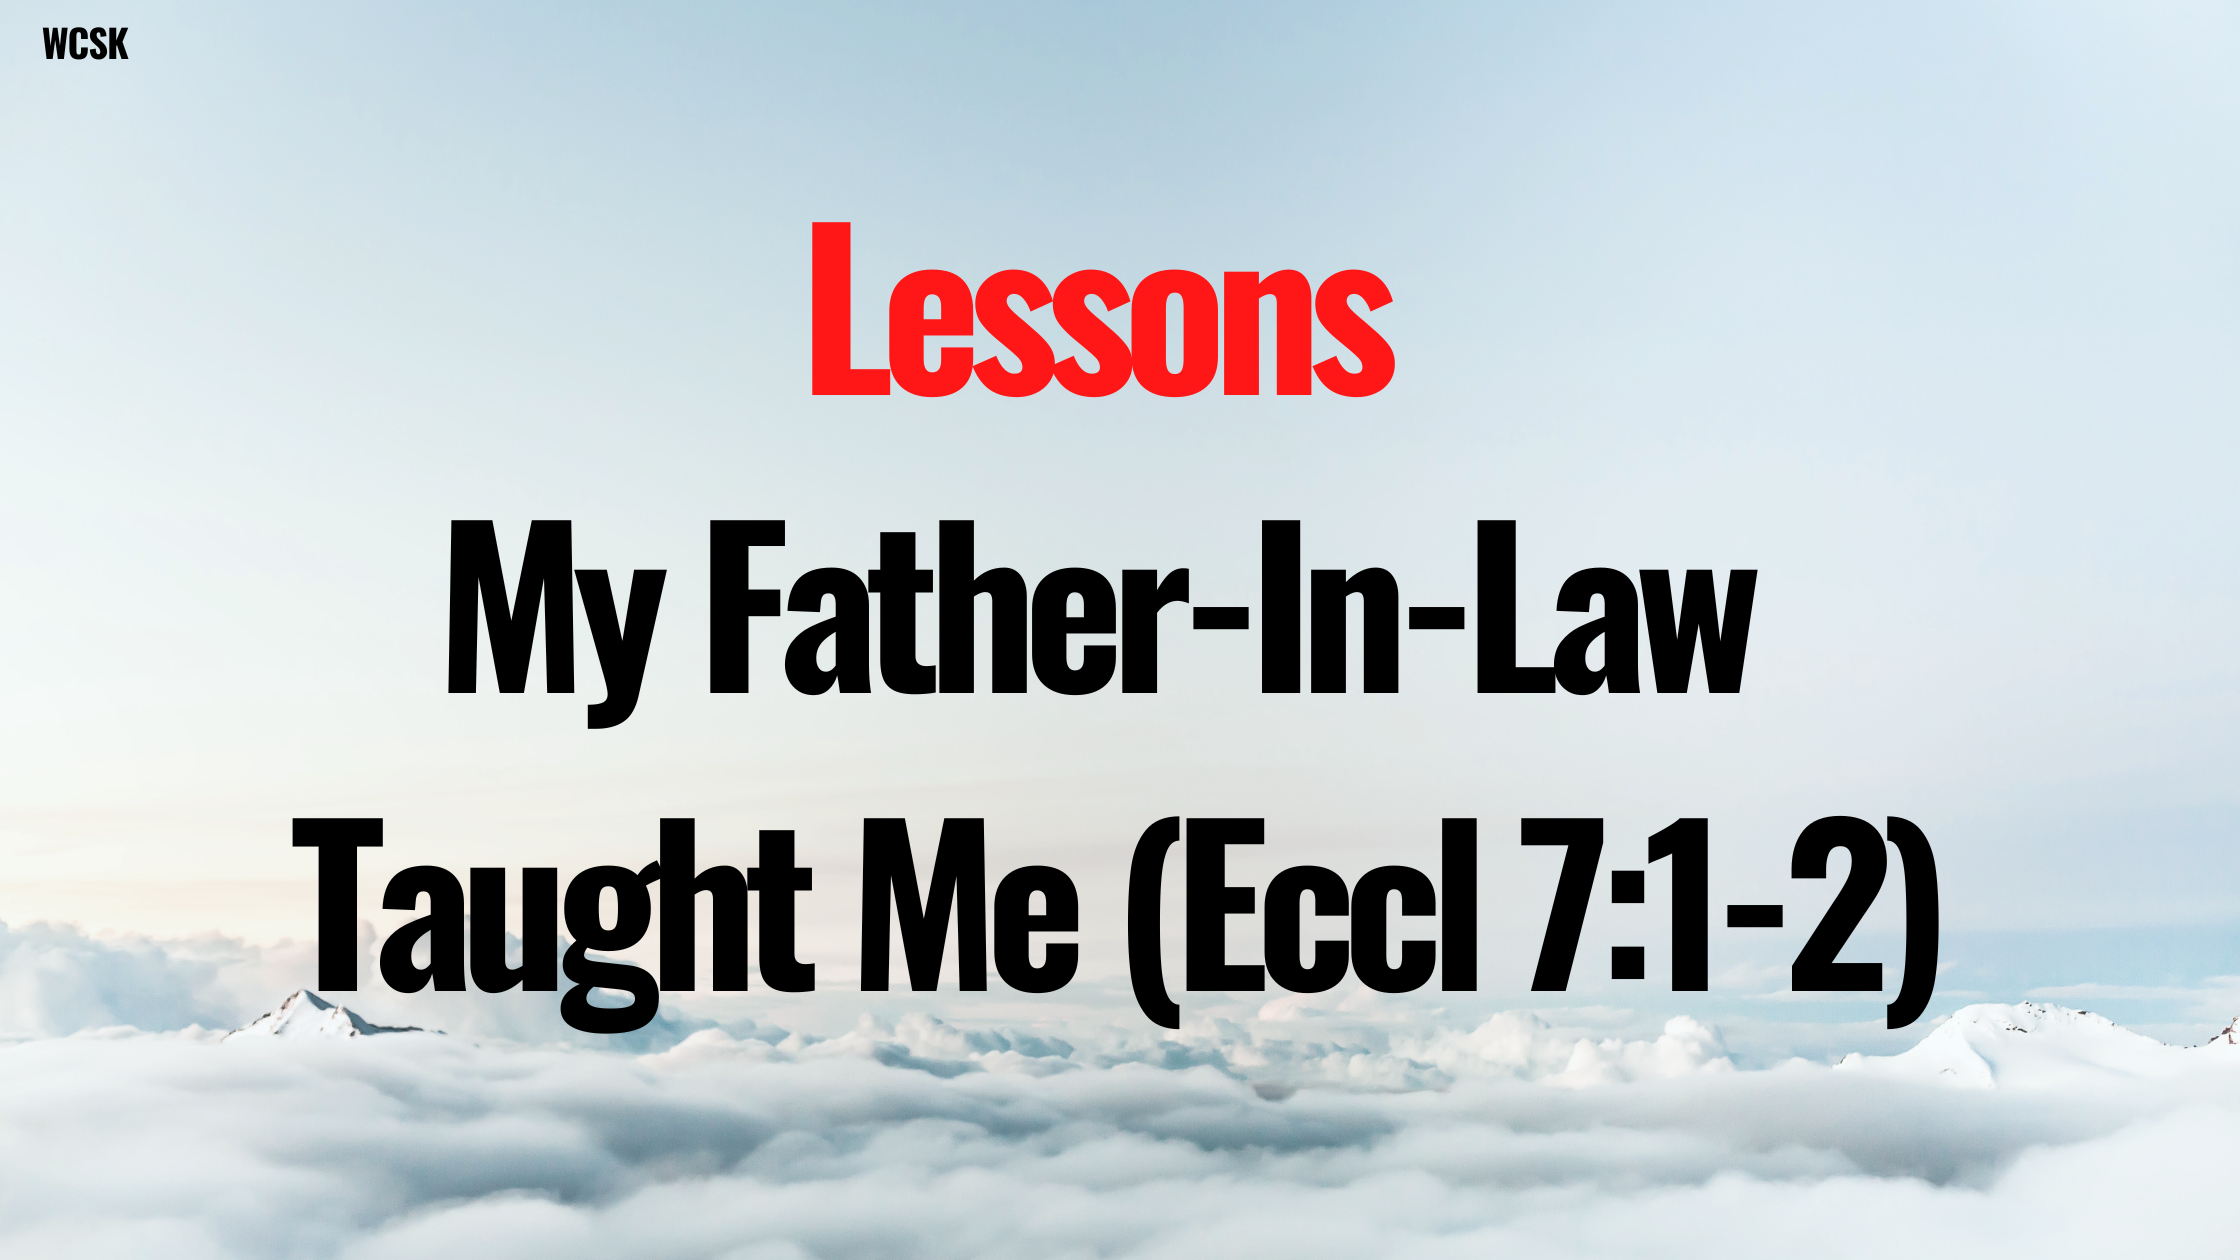 Life Lessons My Father-In-Law Taught Me (Ecclesiastes 7:1-2)